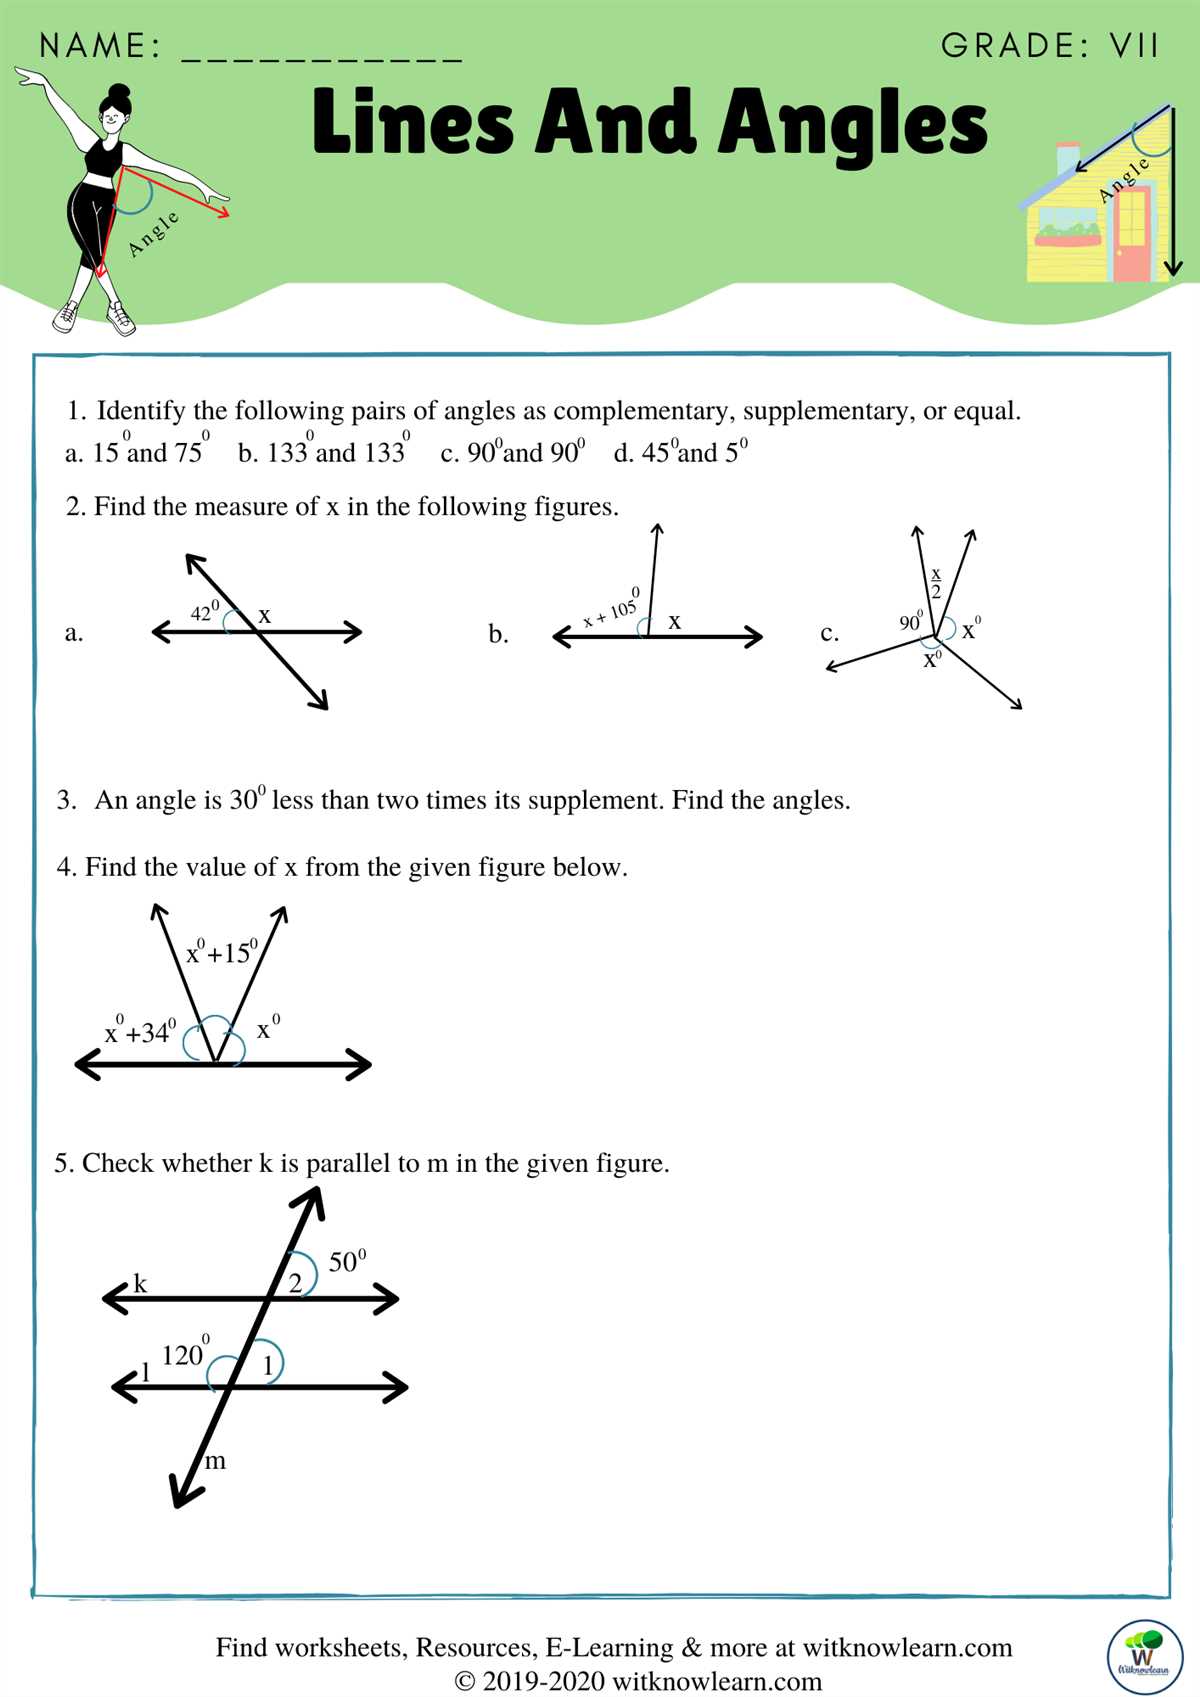 7th grade geometry questions and answers